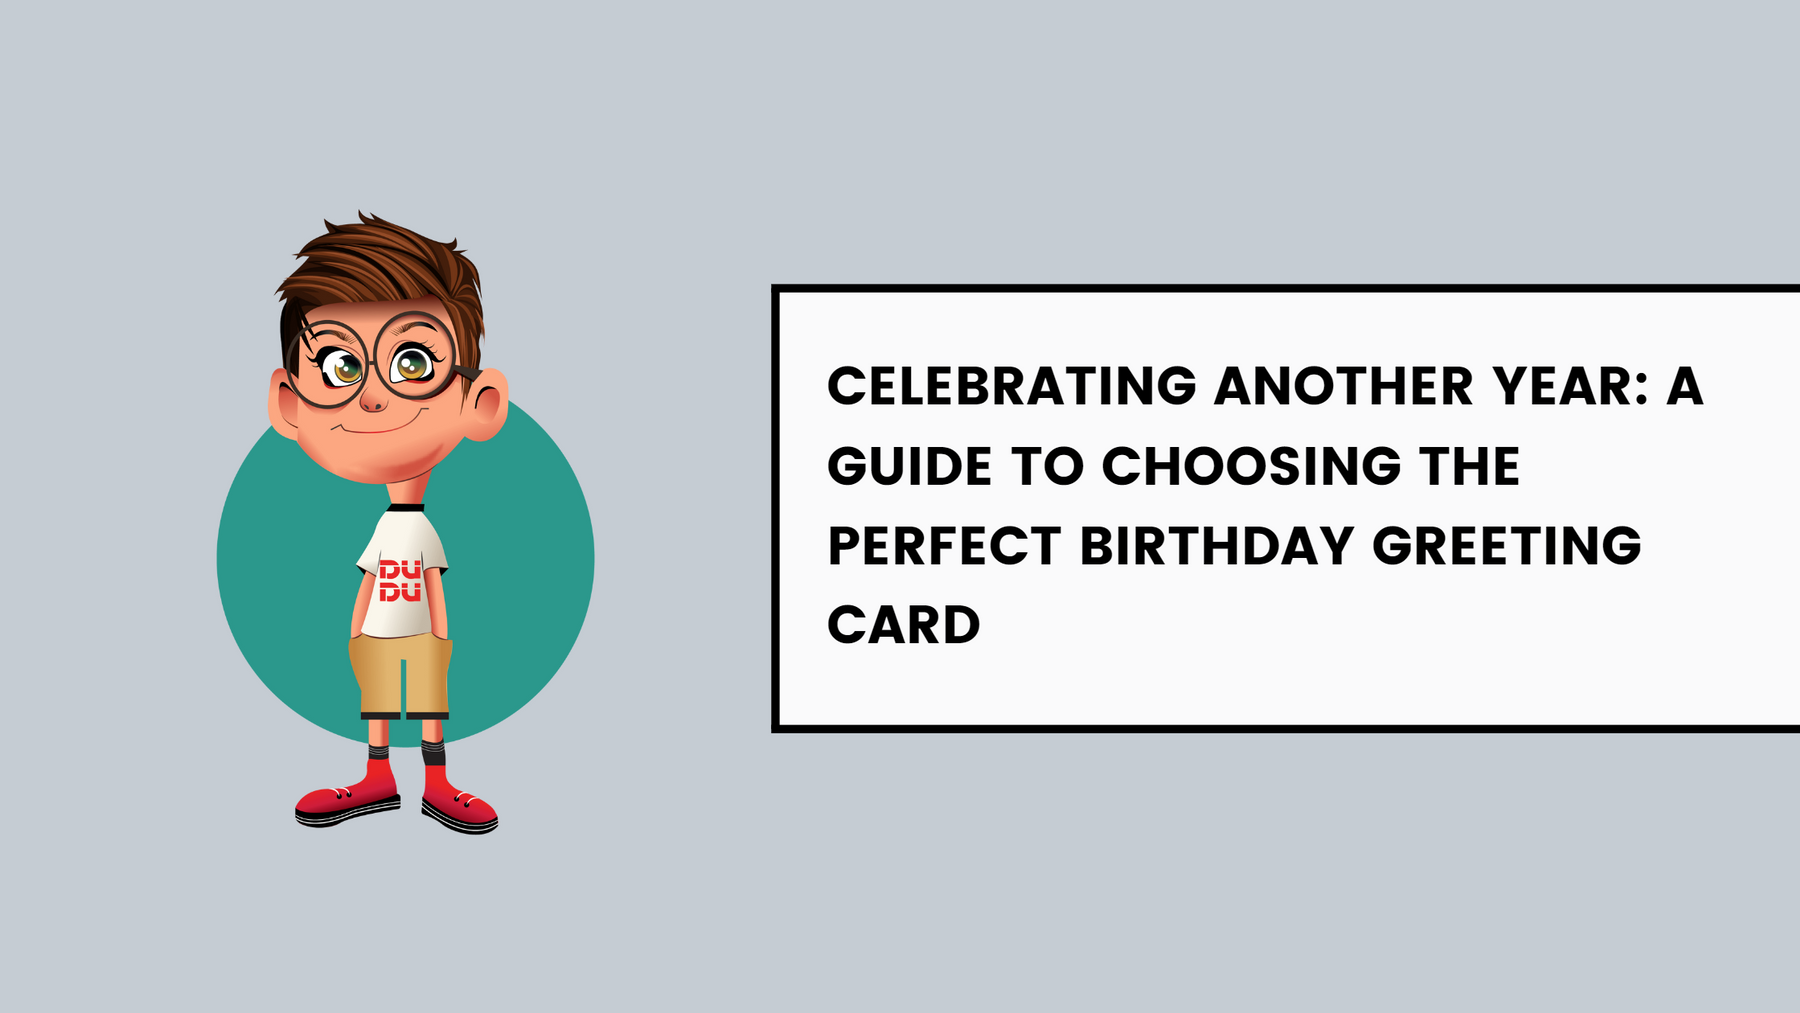 Celebrating Another Year: A Guide To Choosing The Perfect Birthday Greeting Card